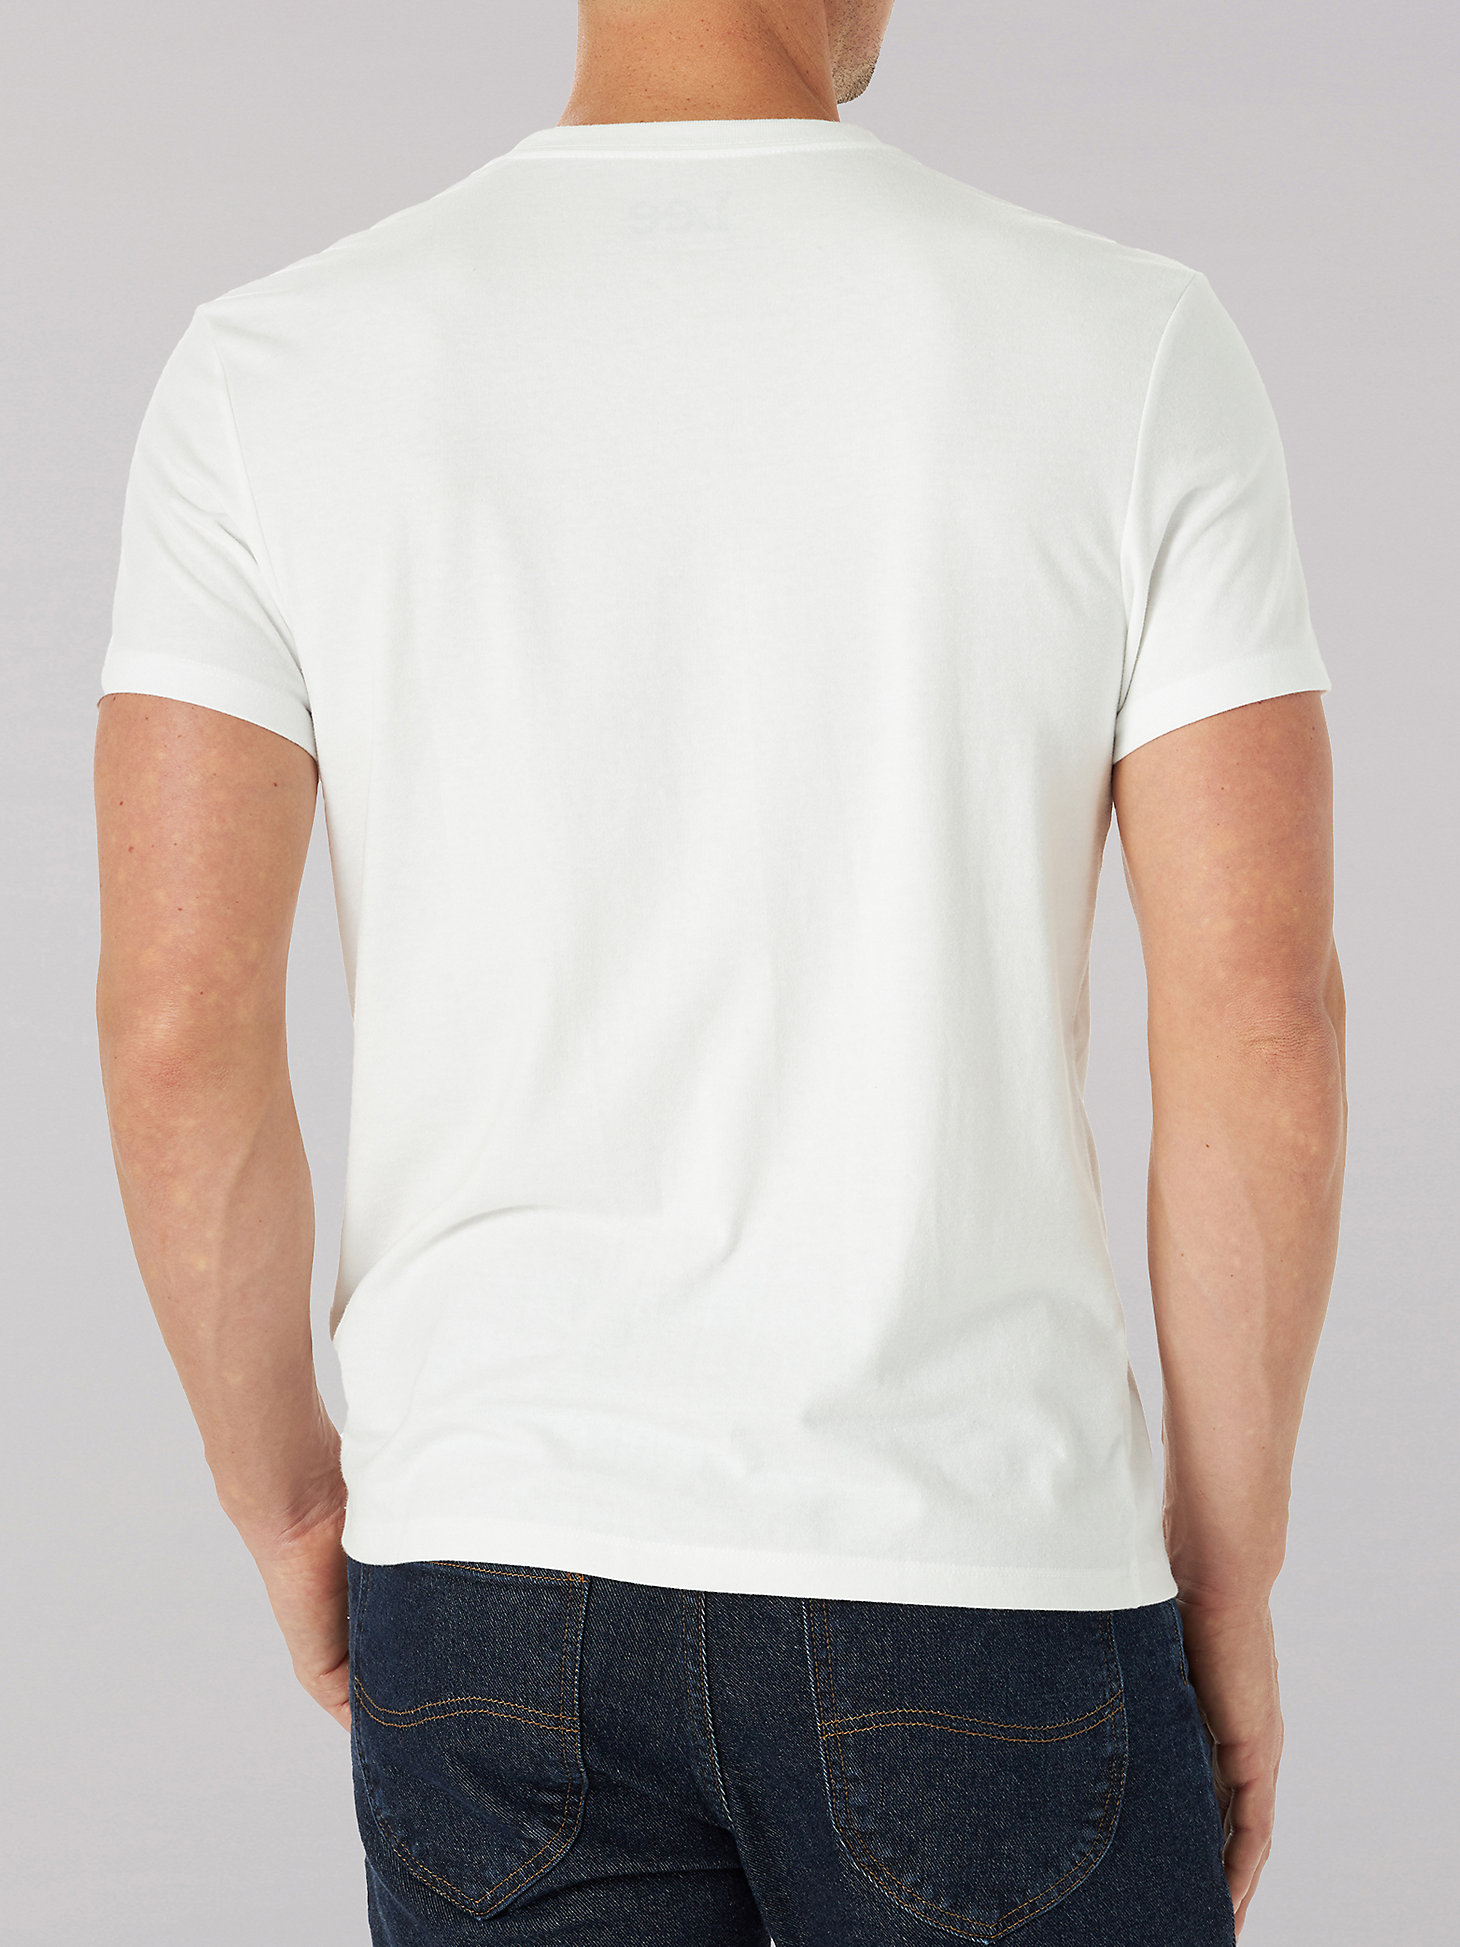 Men's Buddy Lee Cant Bust 'Em Graphic Tee in Solid White alternative view 1